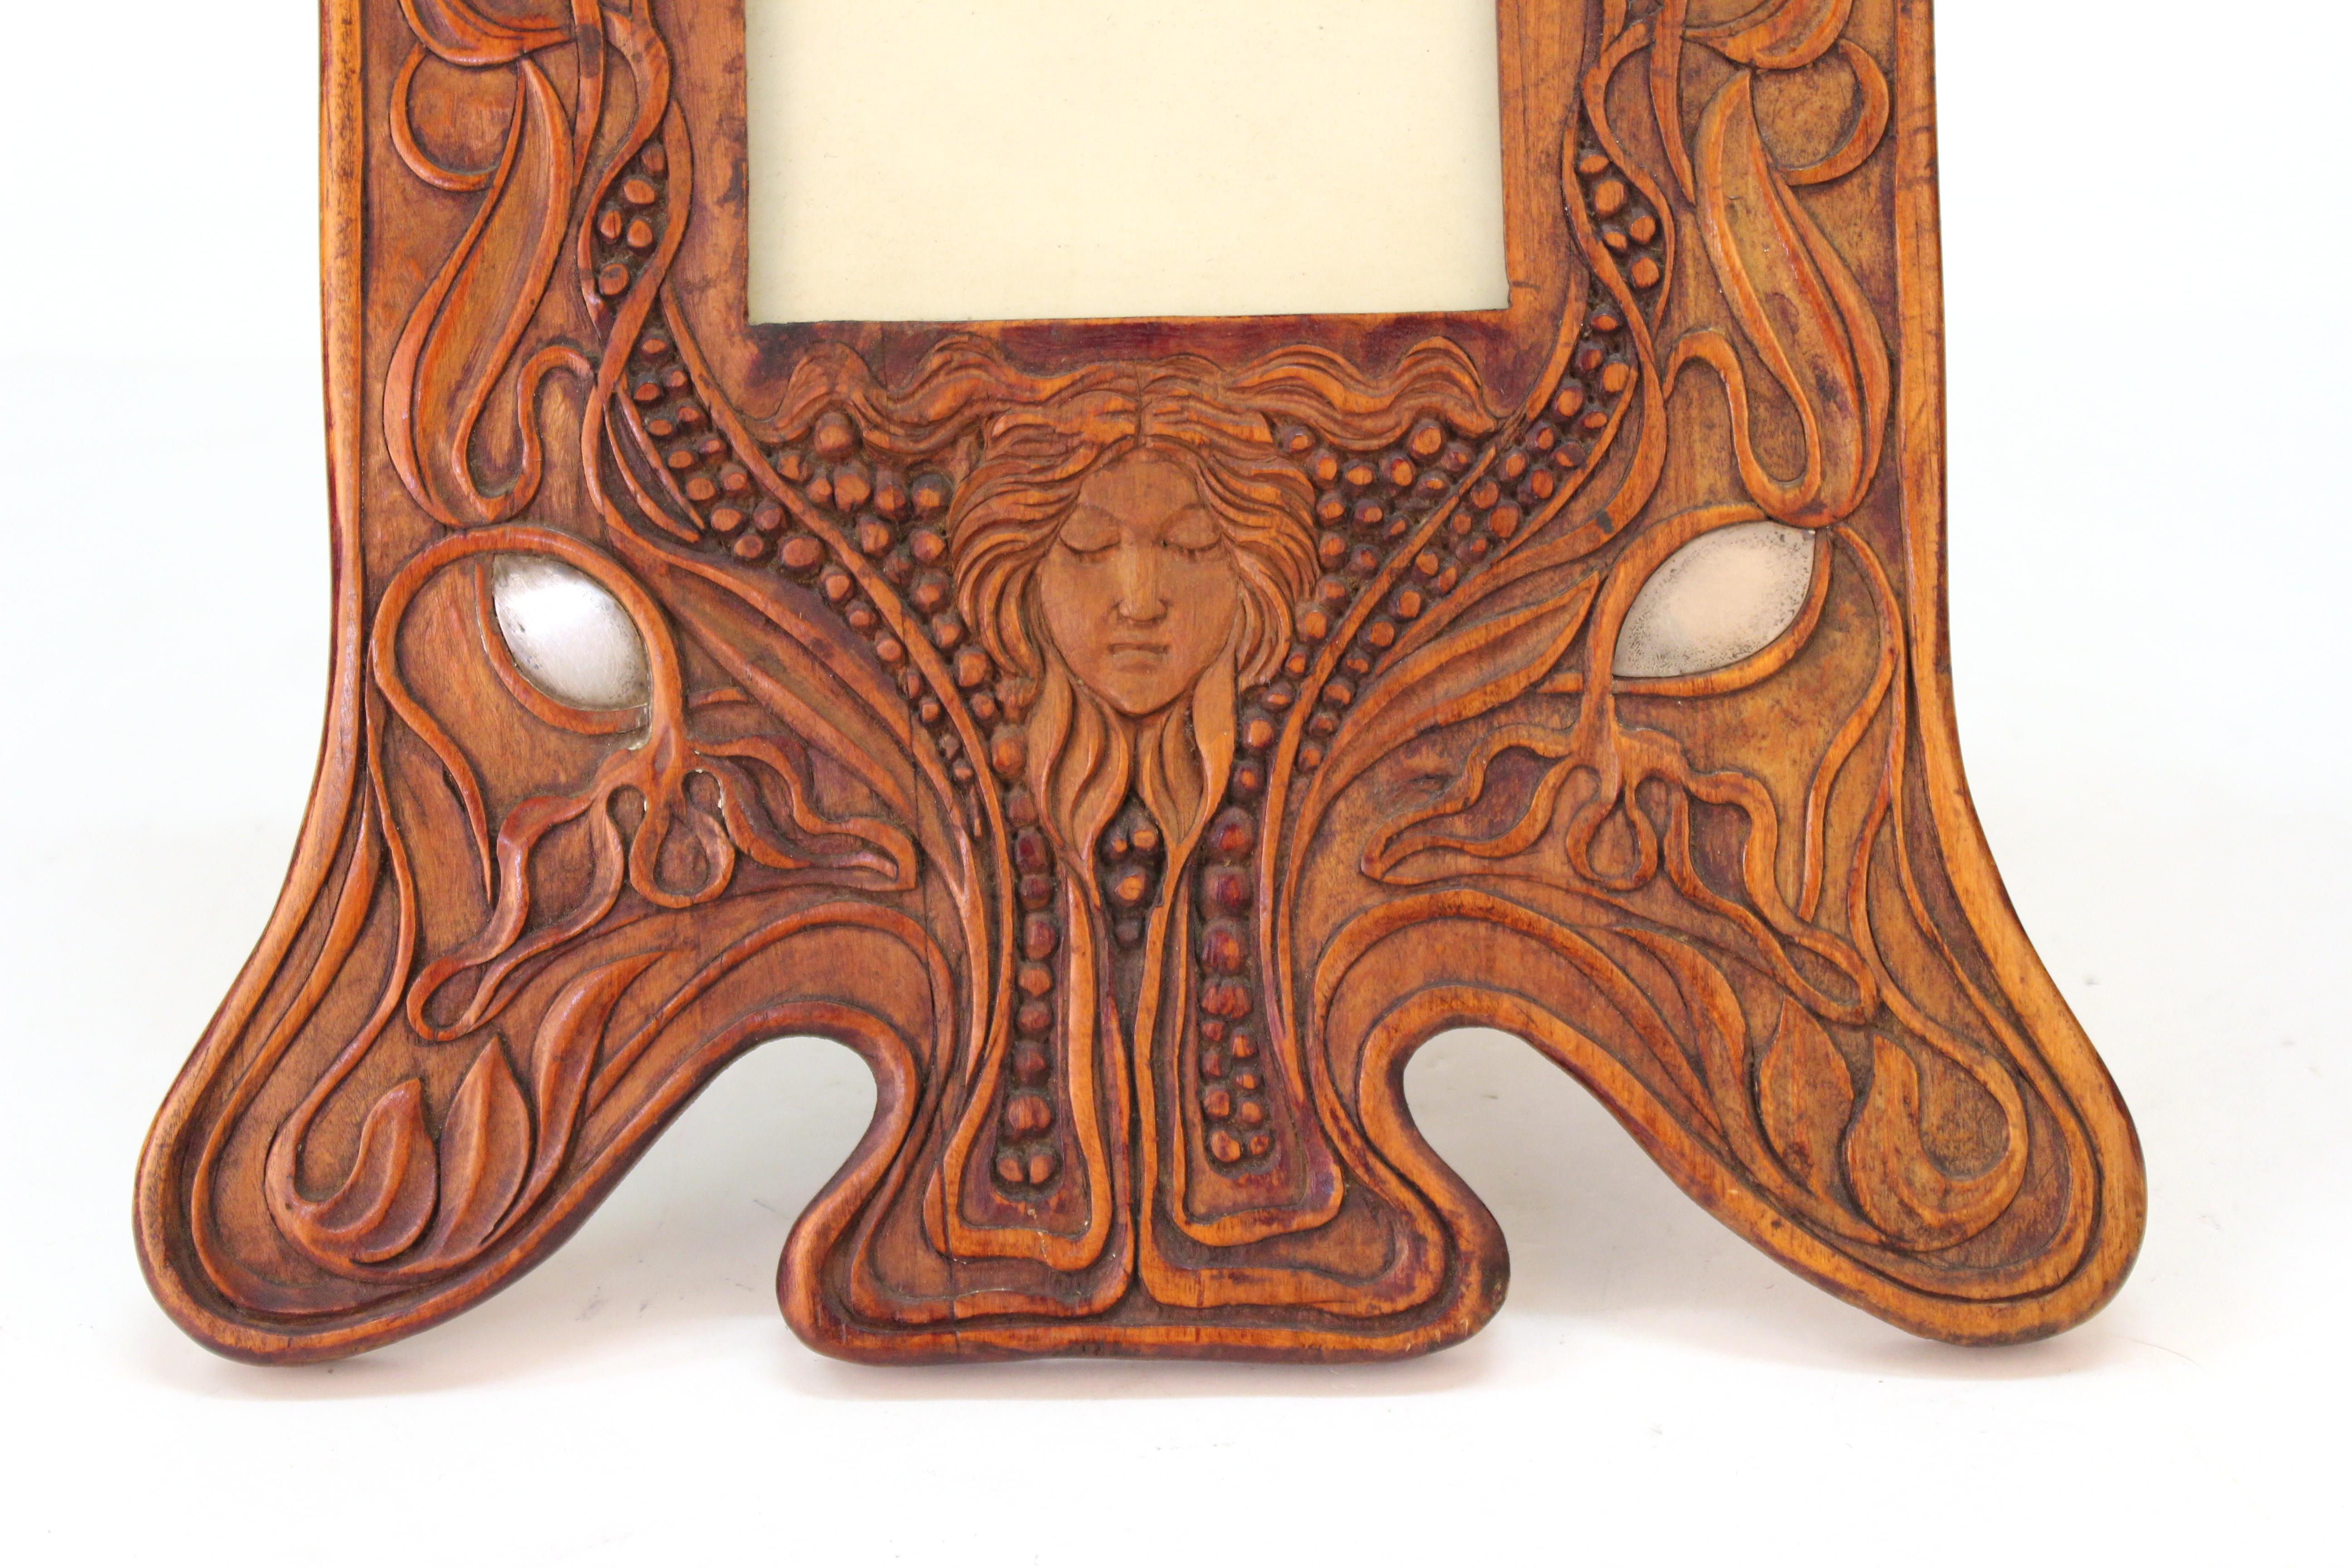 Italian Art Nouveau picture frame attributed to Carlo Zen, richly carved in fruit-wood with silver inlays and a fruit-wood back leg. The piece was created in Italy circa 1900 and is in great vintage condition with some age-related wear to the wood.